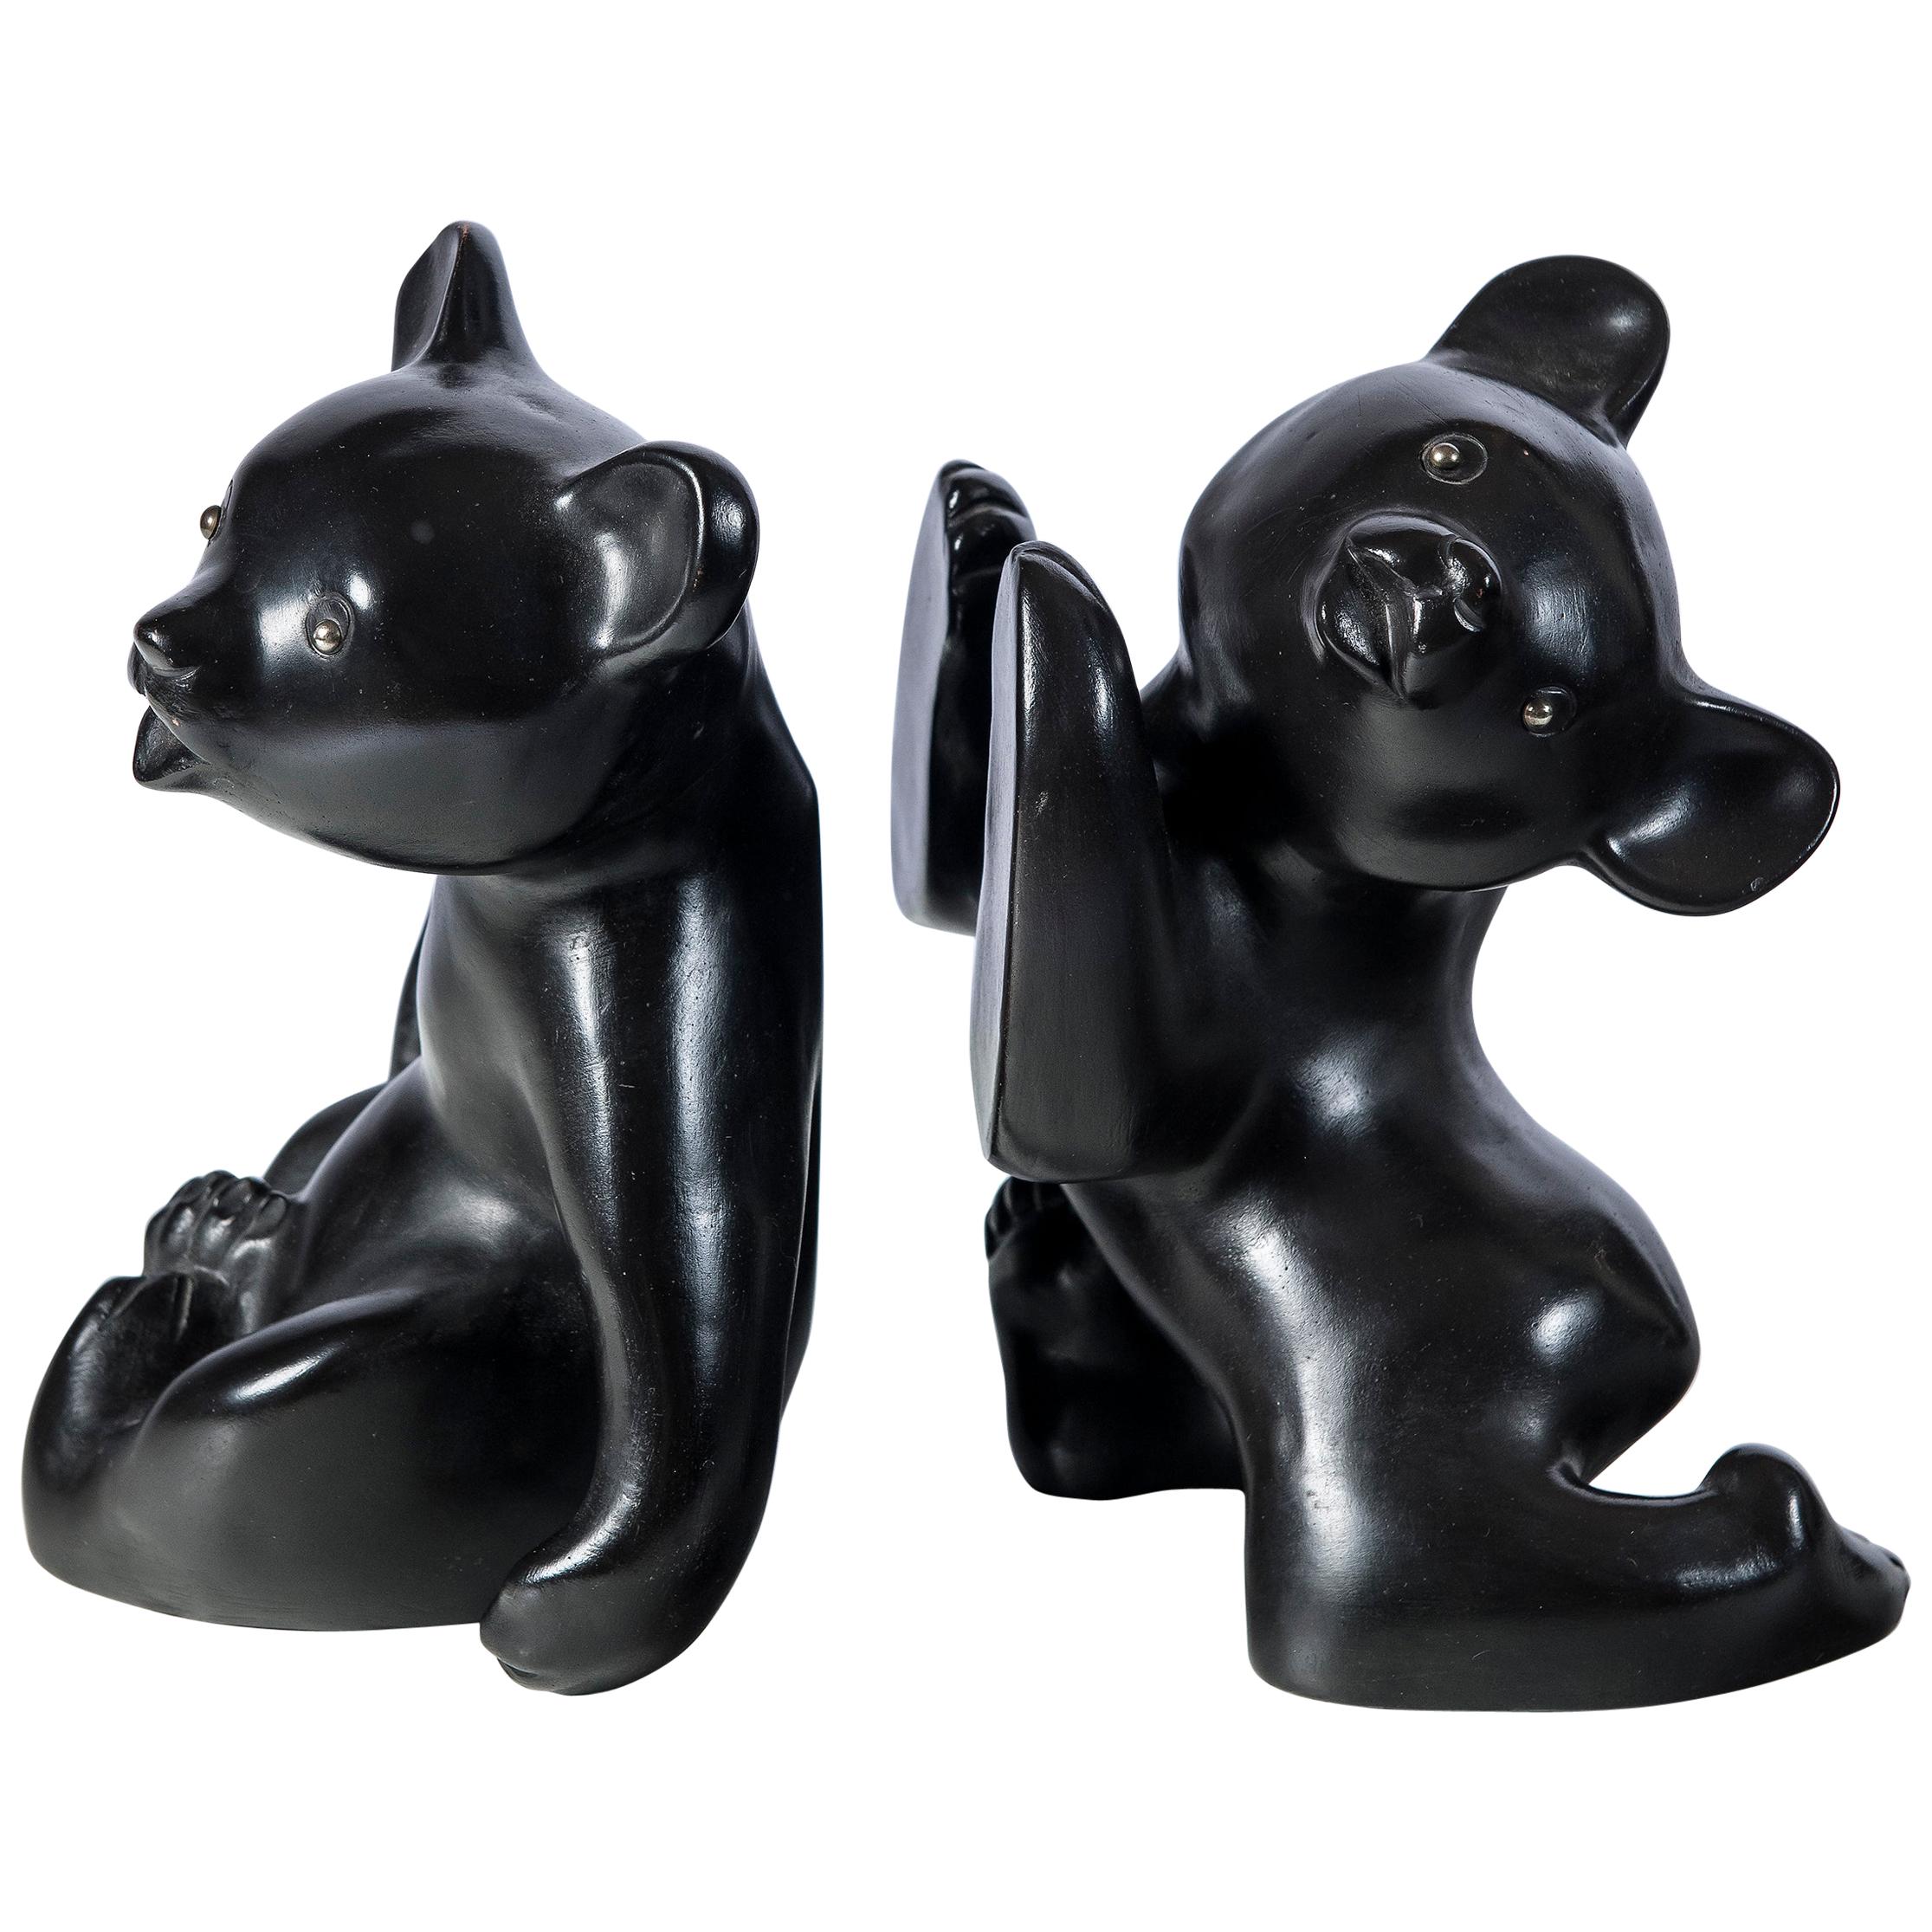 Pair of Ceramic Bears Bookends, Signed Vienna, by Leopold Anzengruber, 1955